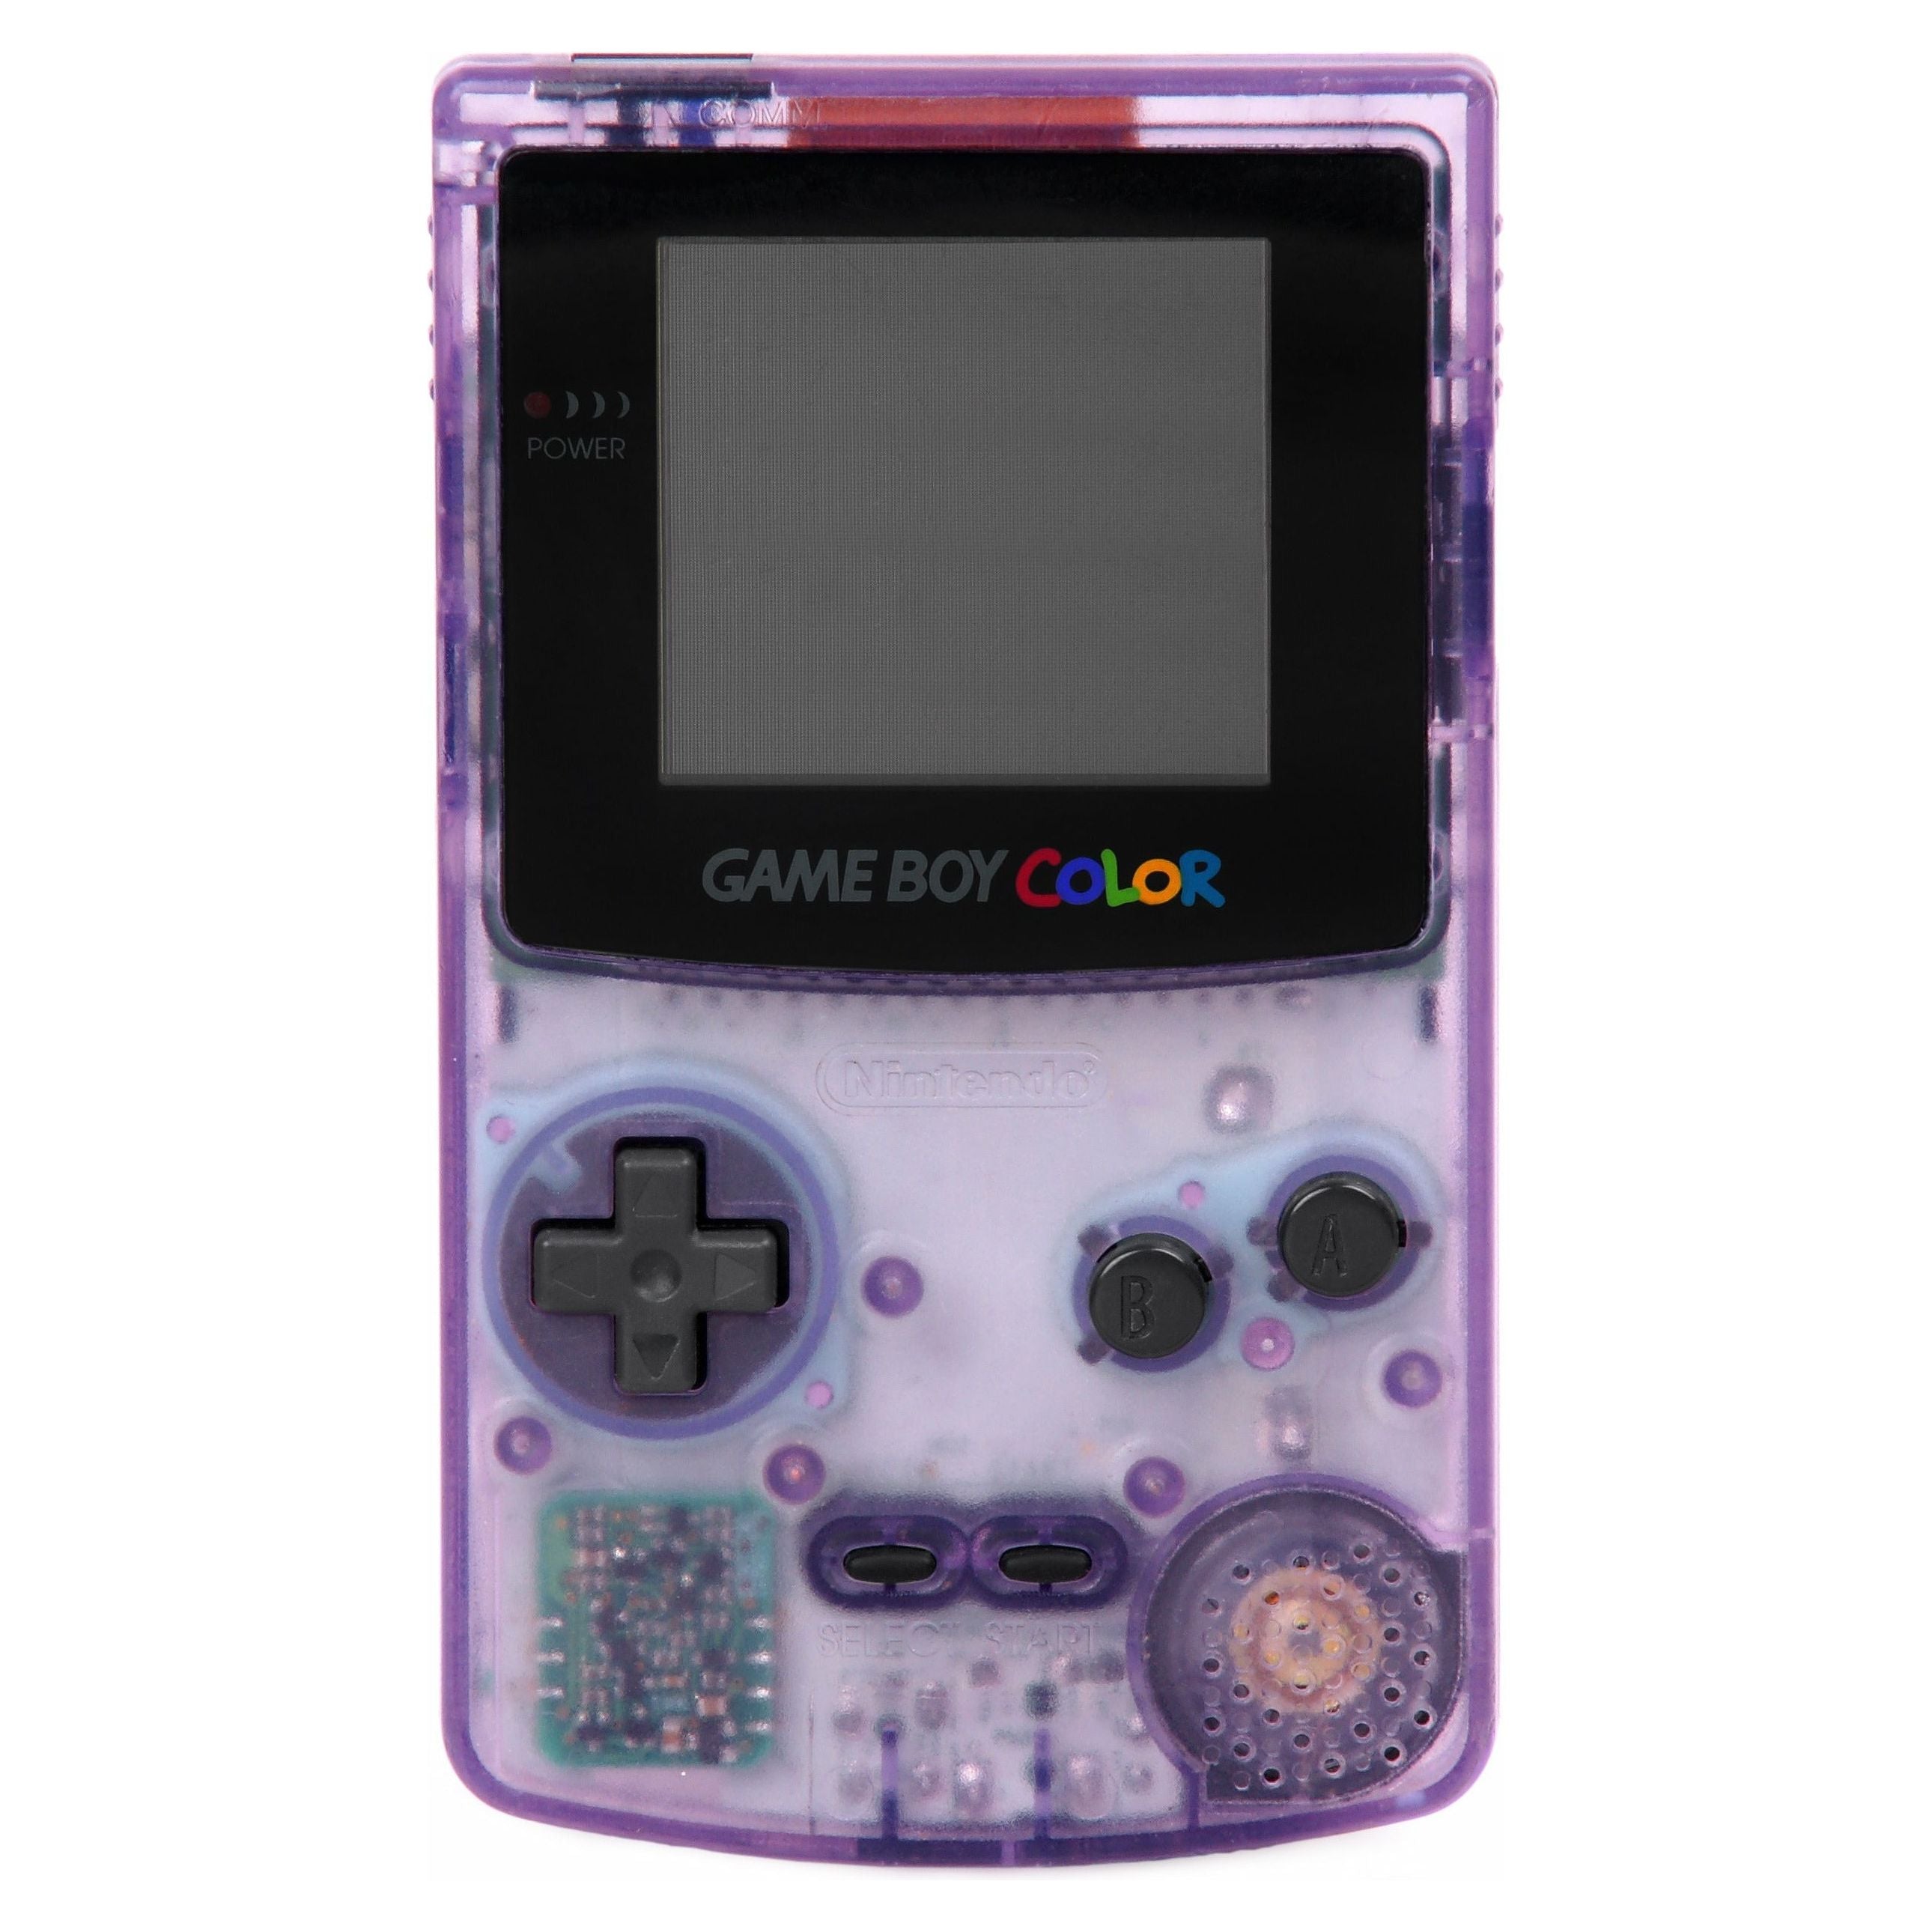 Nintendo Game Boy Advance Atomic Purple Game Console With Backlit Screen